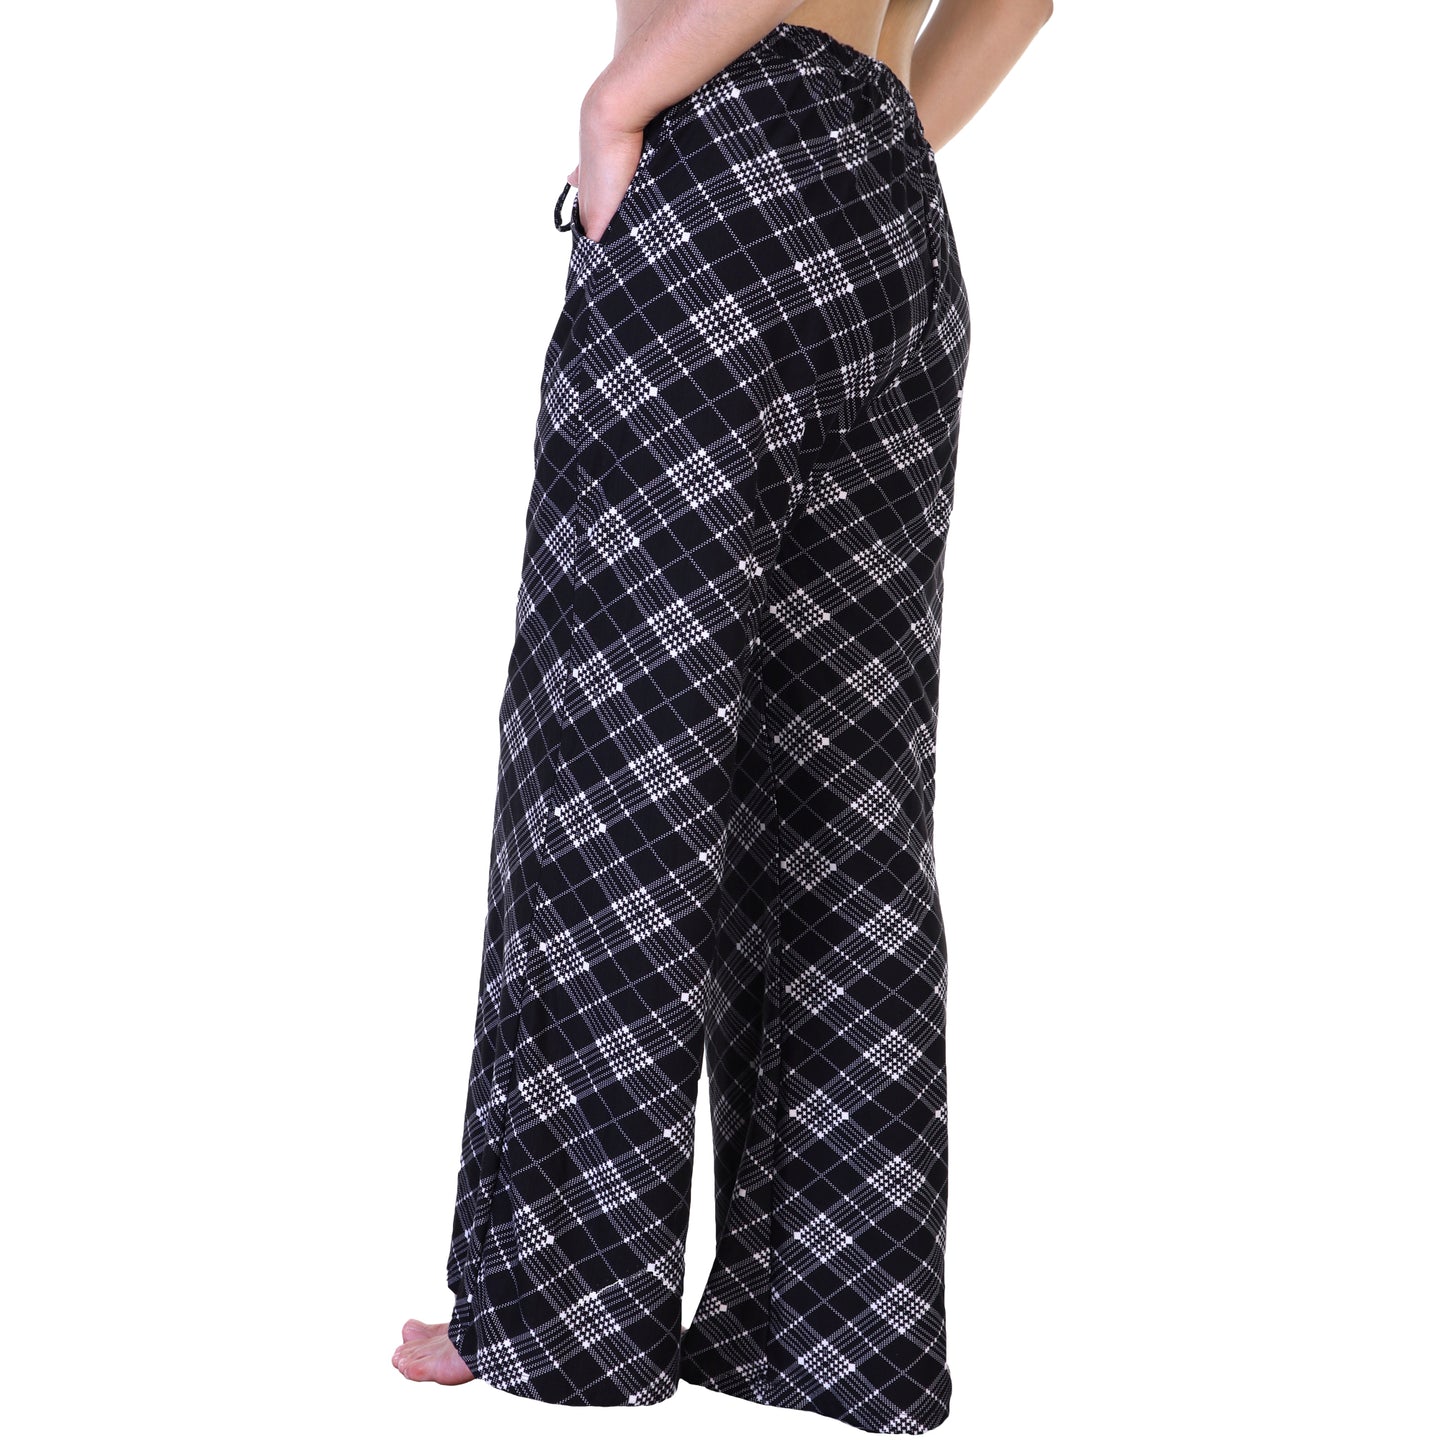 Angelina Mid-rise Palazzo Pants with Pockets (1 or 4 Pack), #043